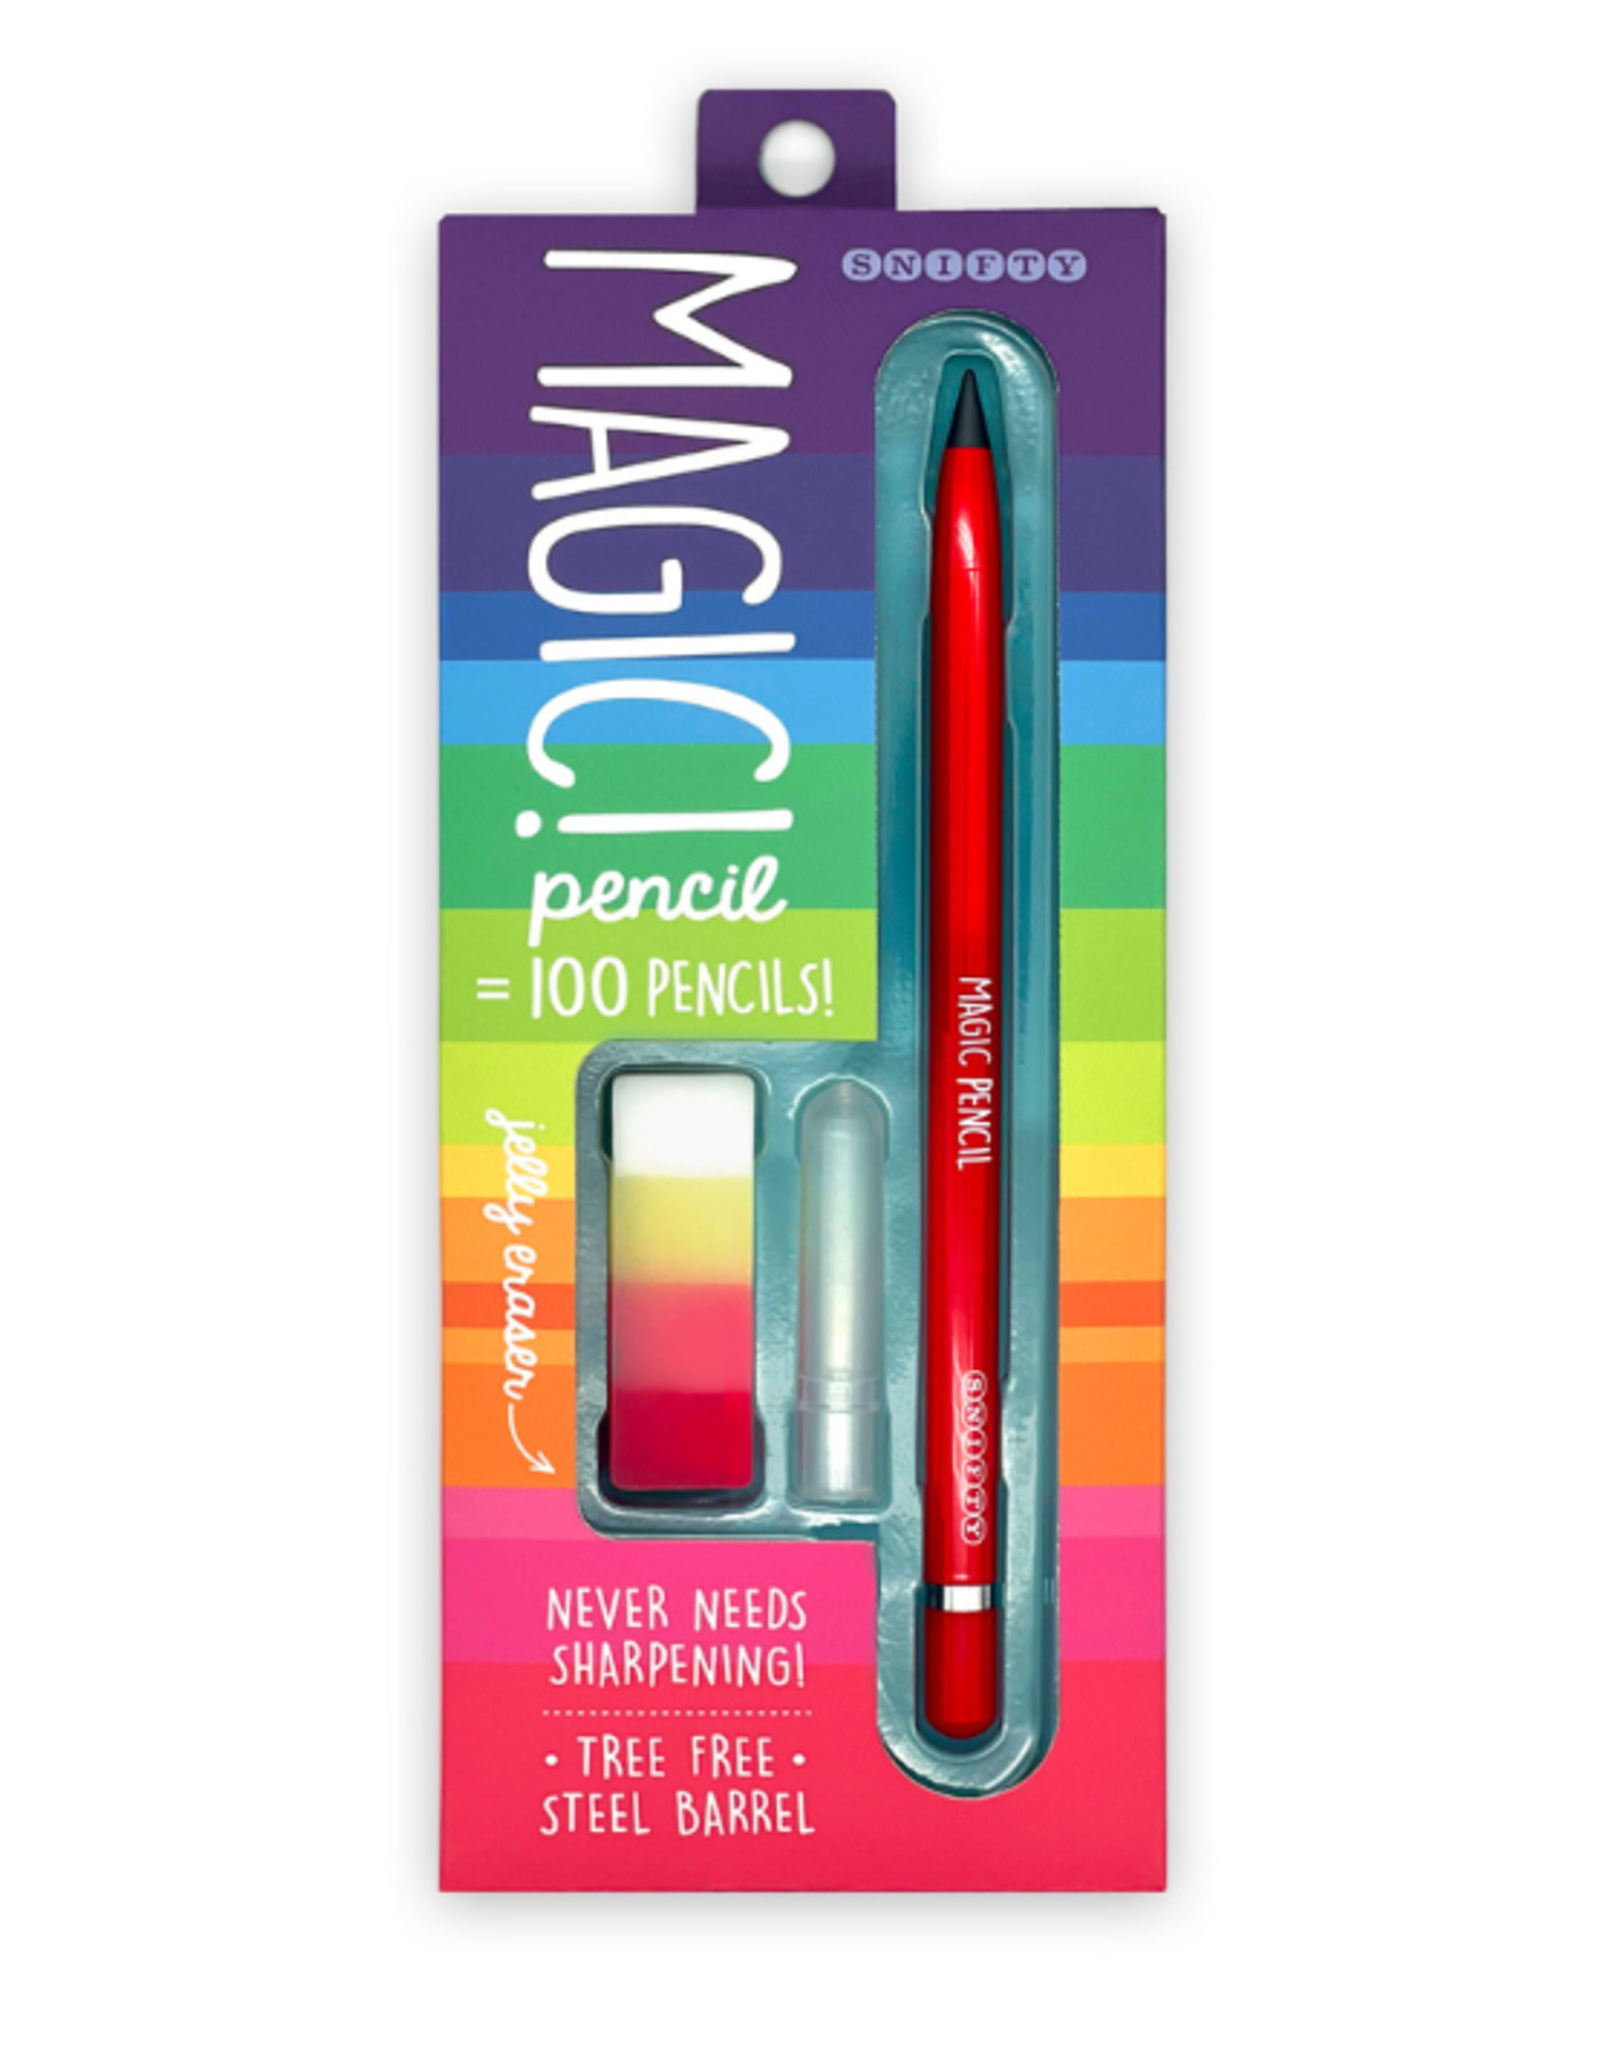 Snifty Snifty - Magic Pencil and Eraser Set (Red)